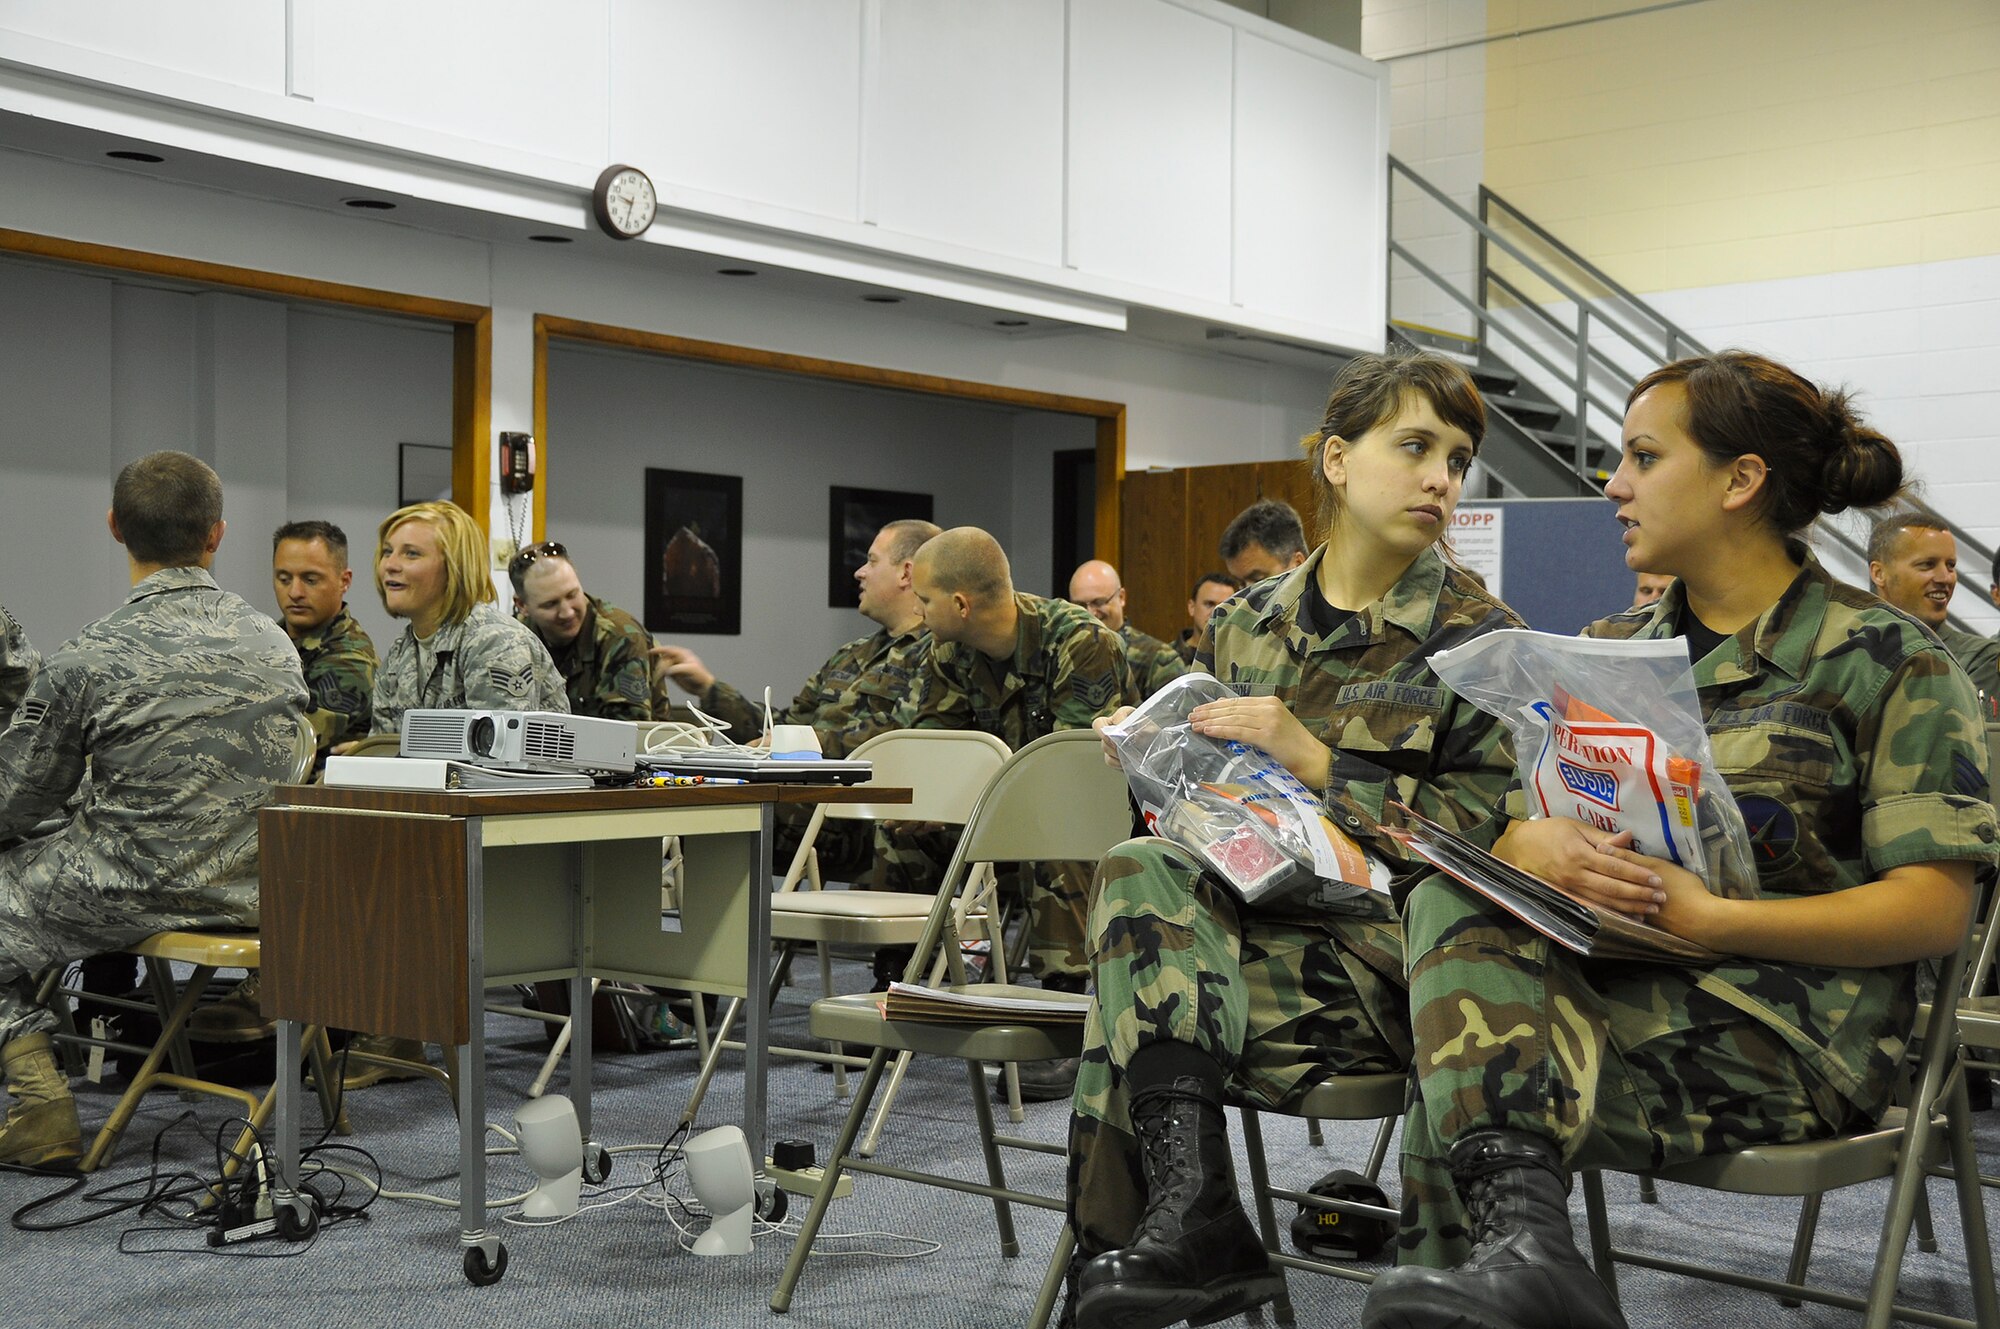 Airmen from the 128th Air Refueling Wing wait to receive briefings as part of the wing's pre-deployment process on Tuesday, June 30, 2009.  The briefings were given by medical readiness personnel, family support staff, personnel specialists, intel officers, and the civil engineering squadron’s threat readiness specialists.  (U.S. Air Force photo by Senior Airman Ryan Kuntze)